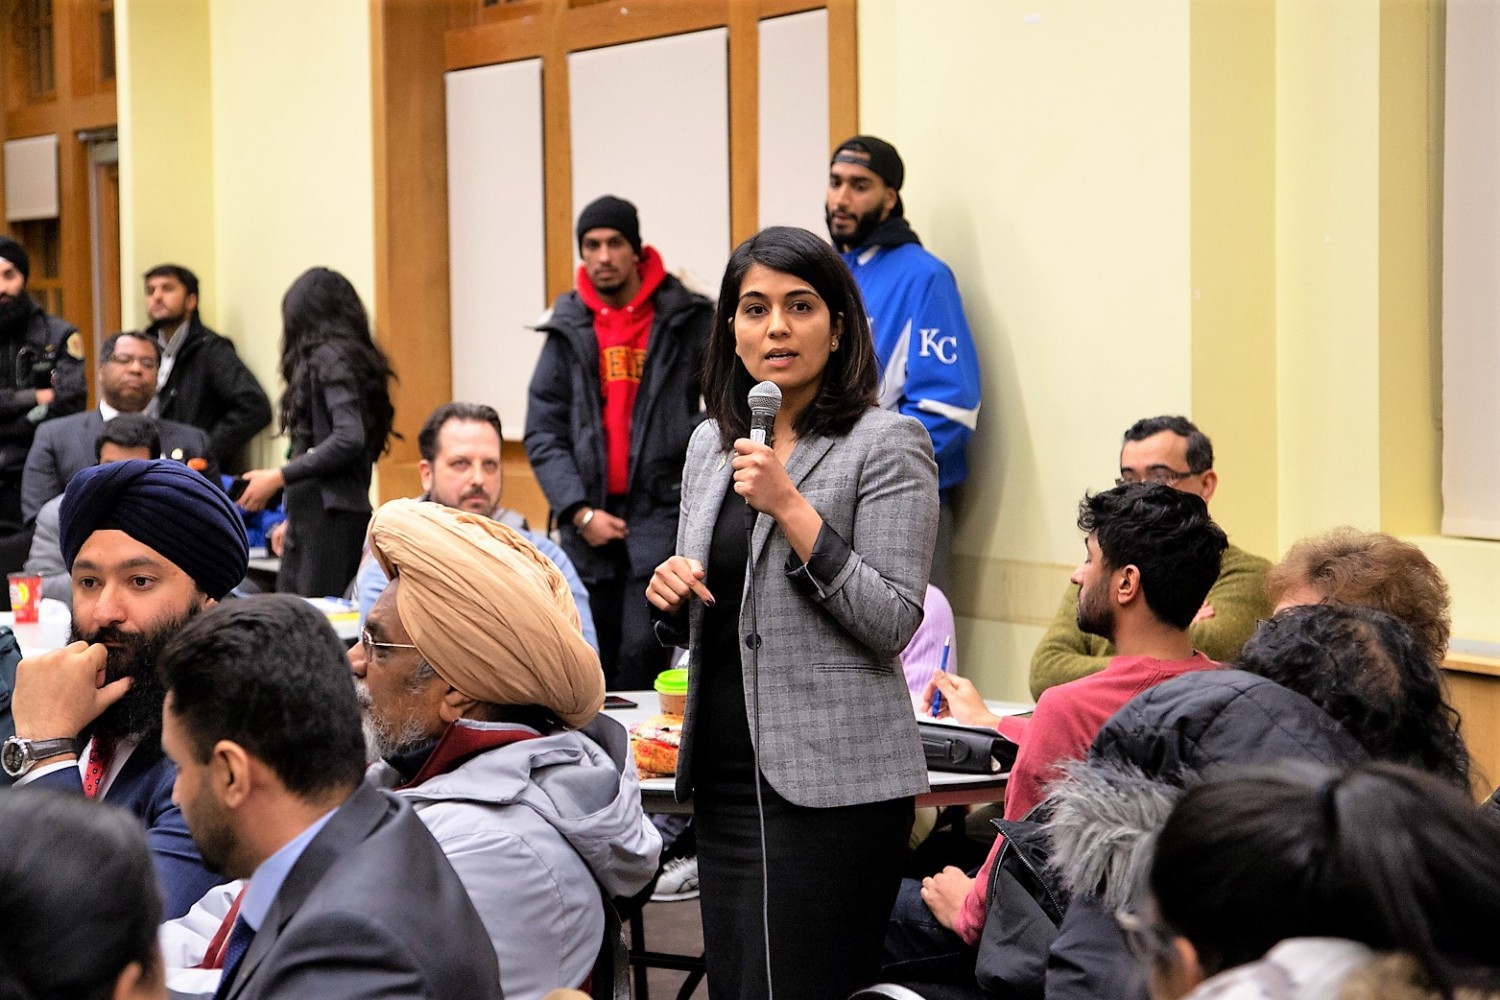 Brampton MPP Sara Singh sounds alarm on loss of provincial public health units; vaccination and opioid issues could be impacted